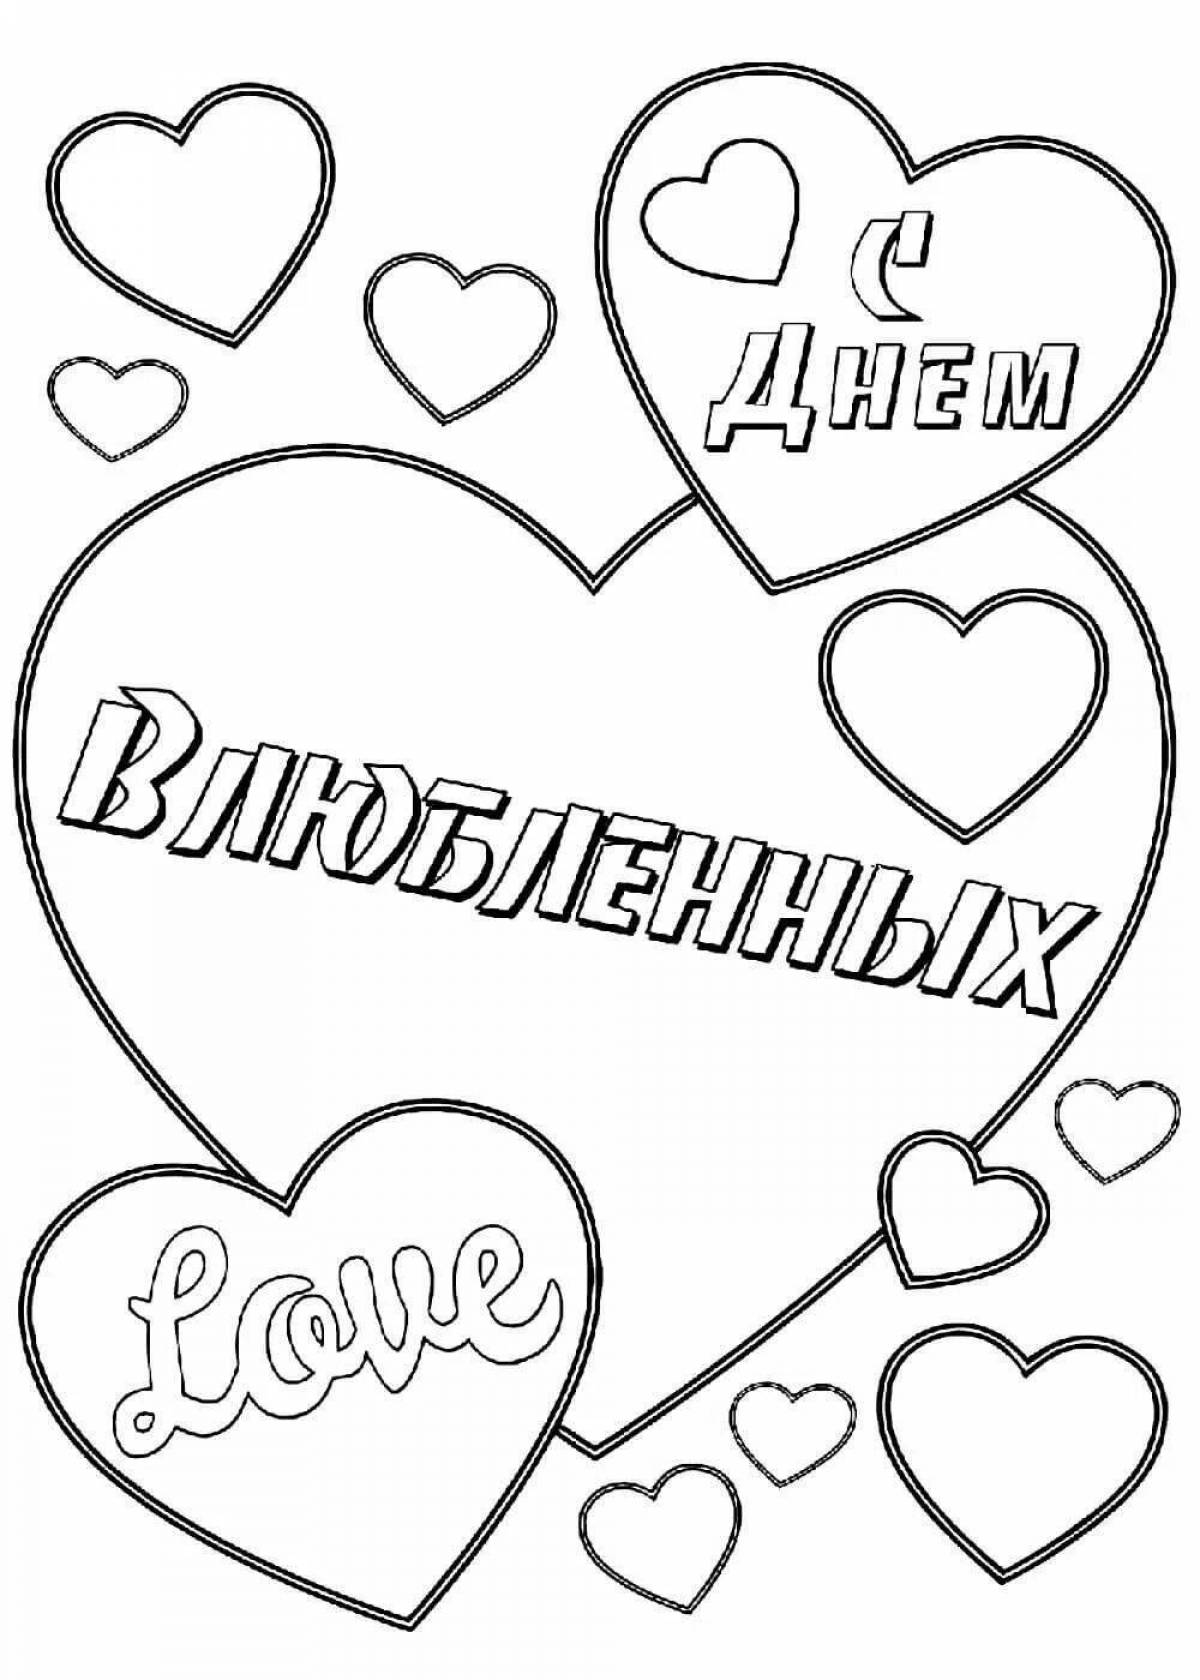 Glitter valentines coloring pages for valentine's day for kids